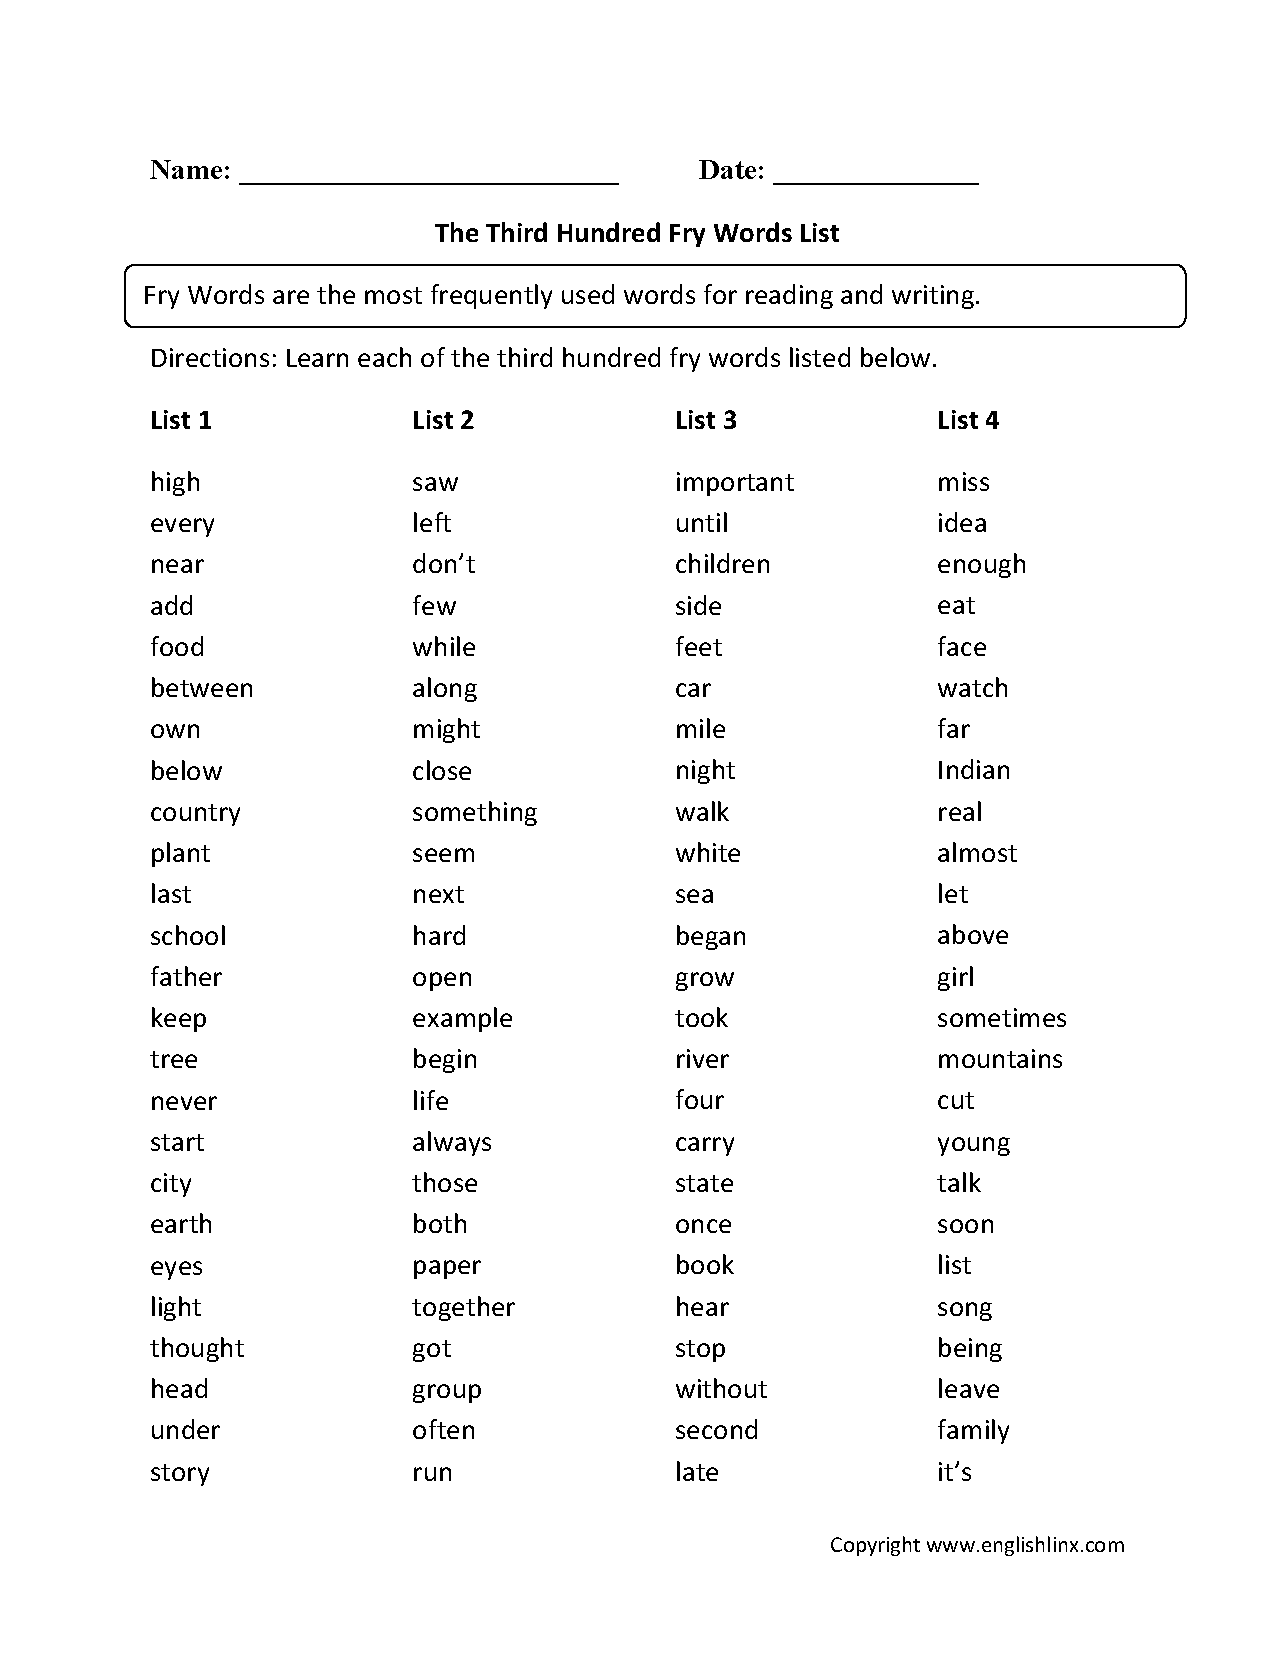 Third Hundred Fry Words List Worksheets